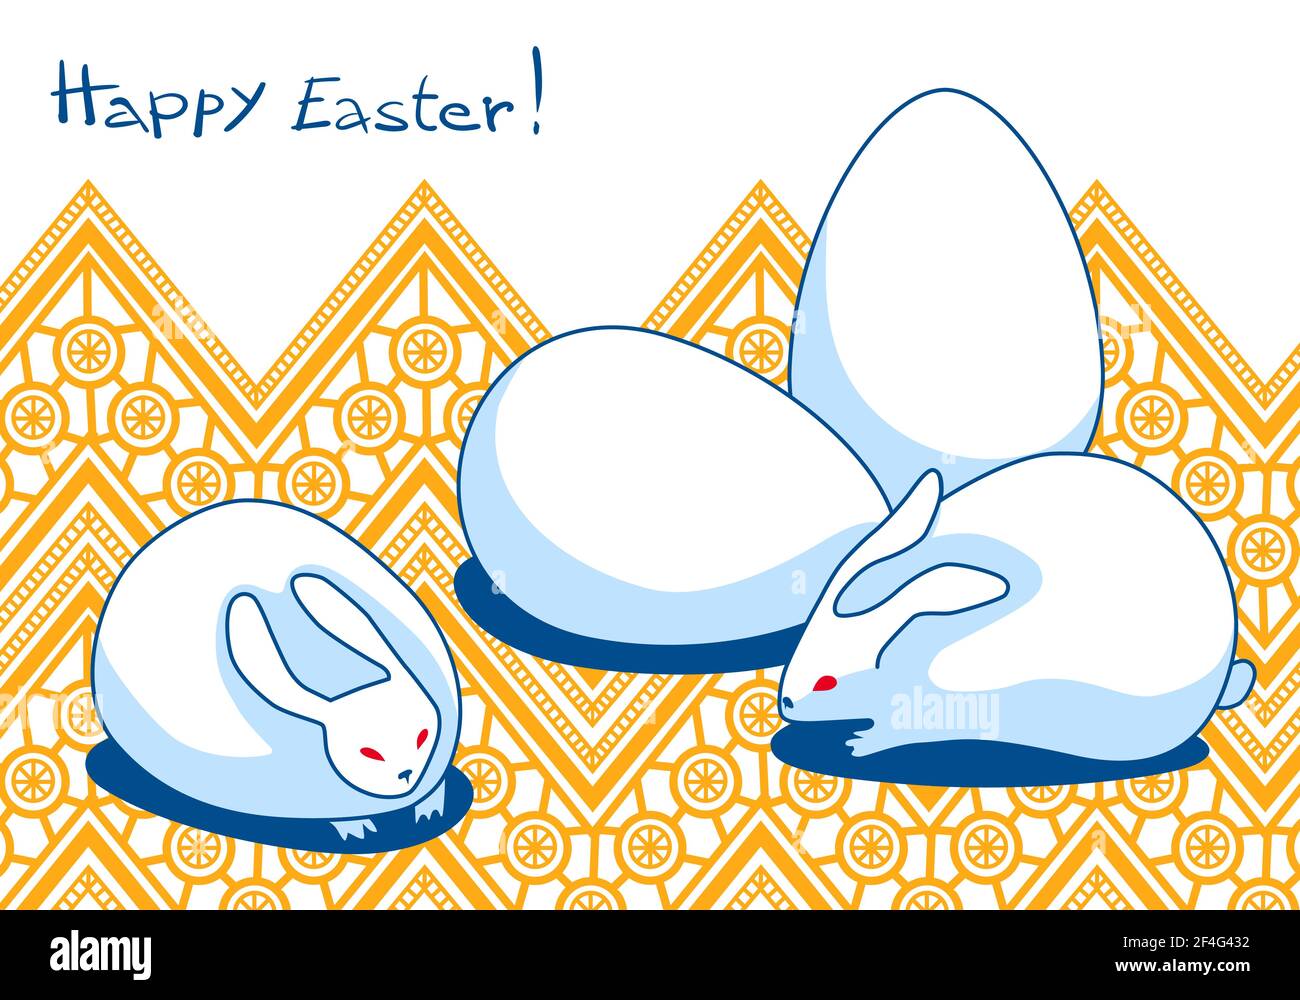 Happy easter. Creative card with stylized white rabbits and eggs on the background of ethnographic geometric ornament. Stock Vector